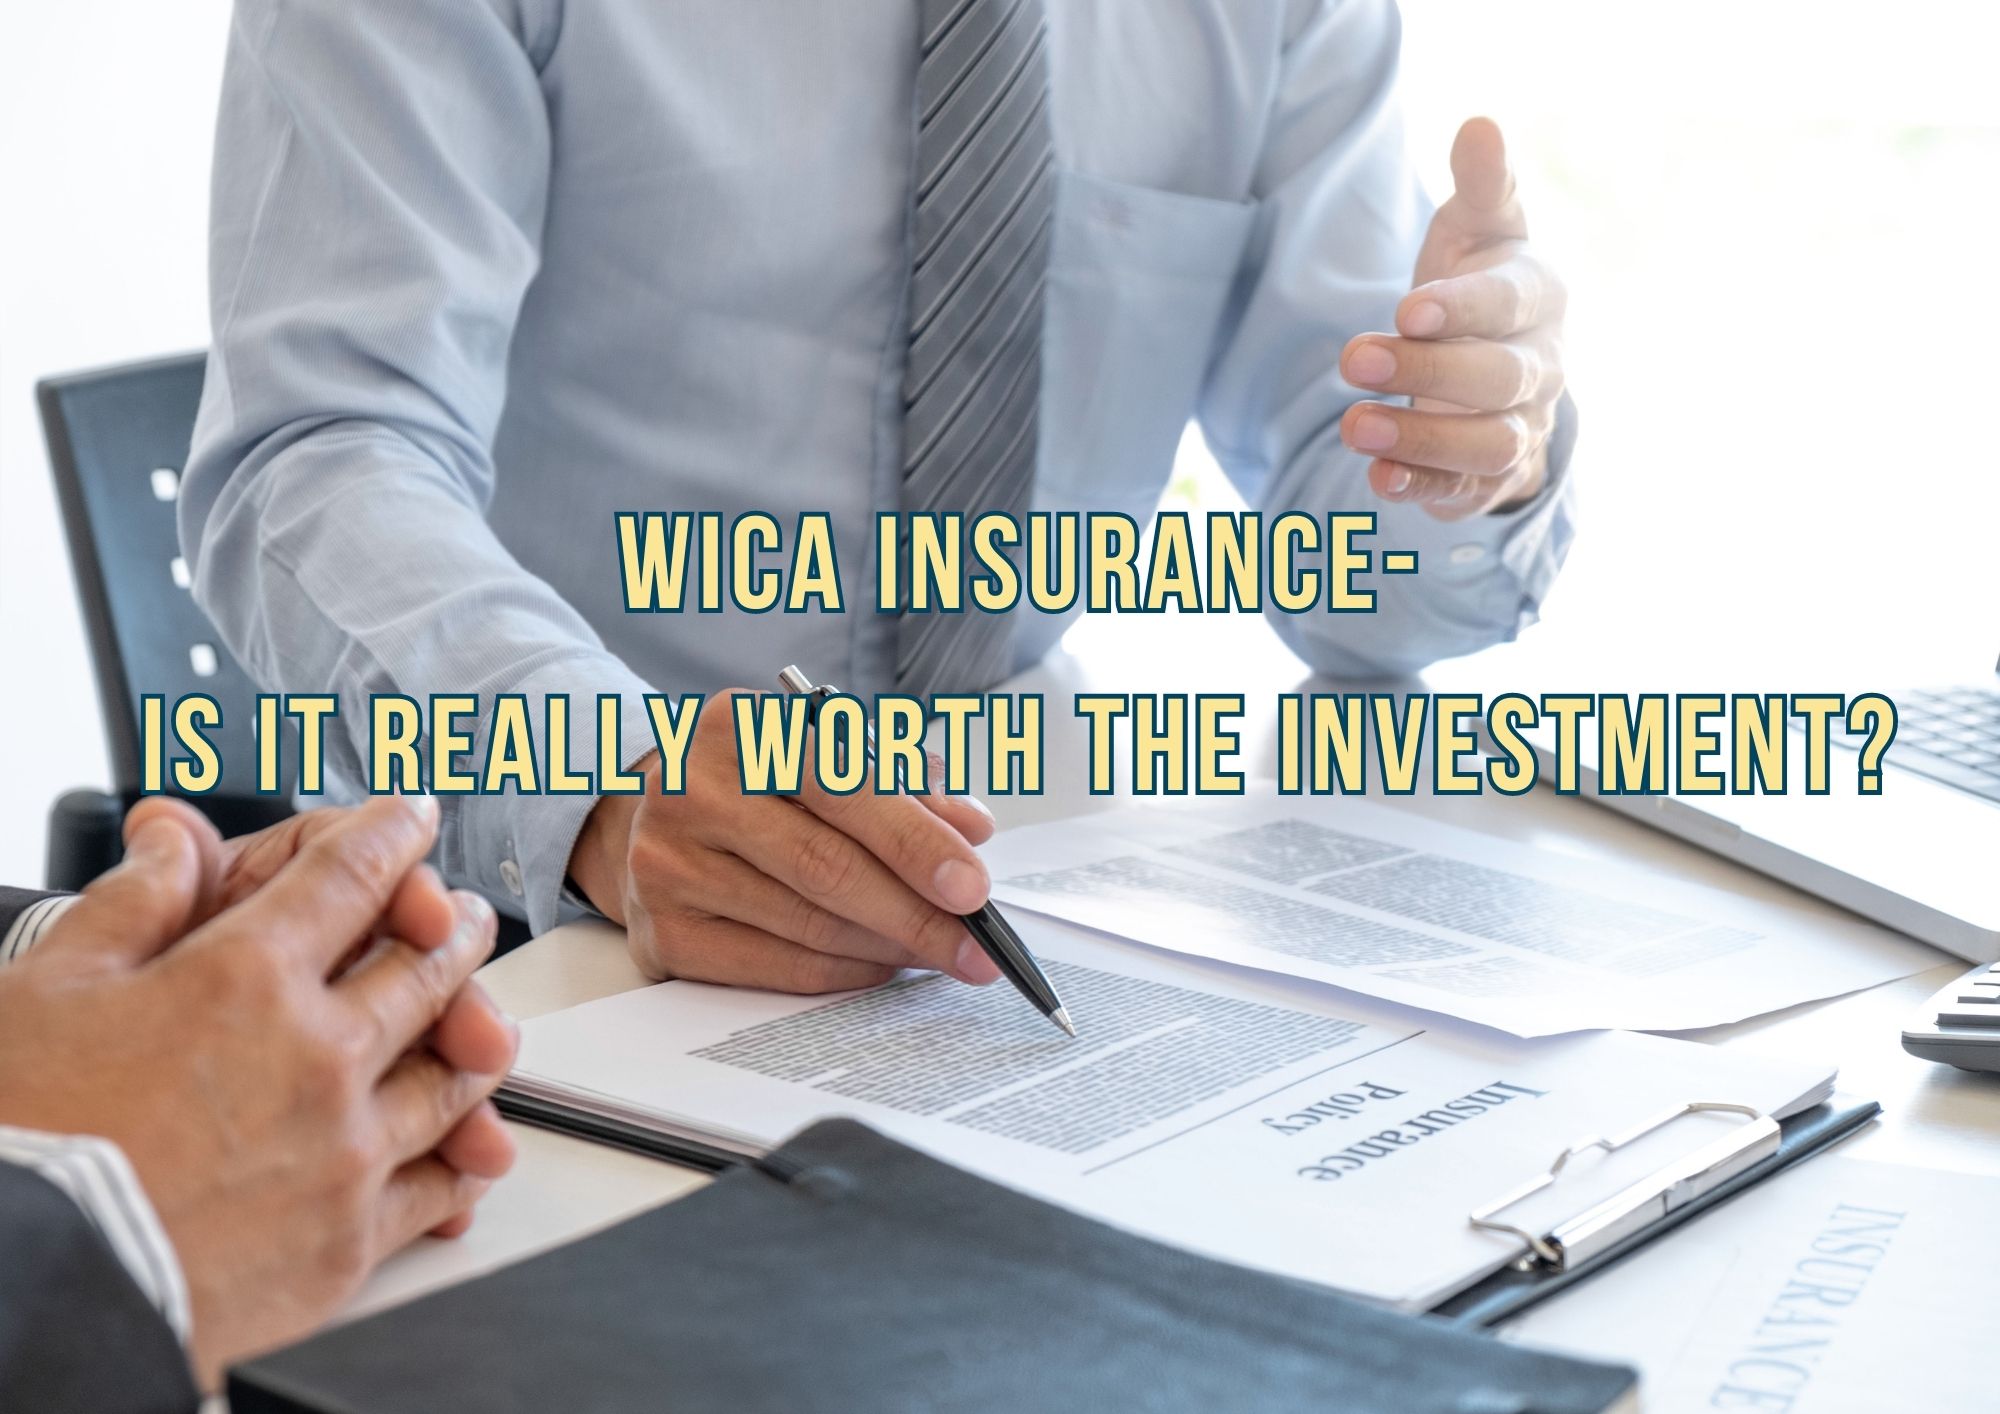 WICA Insurance-Is It Really Worth the Investment?